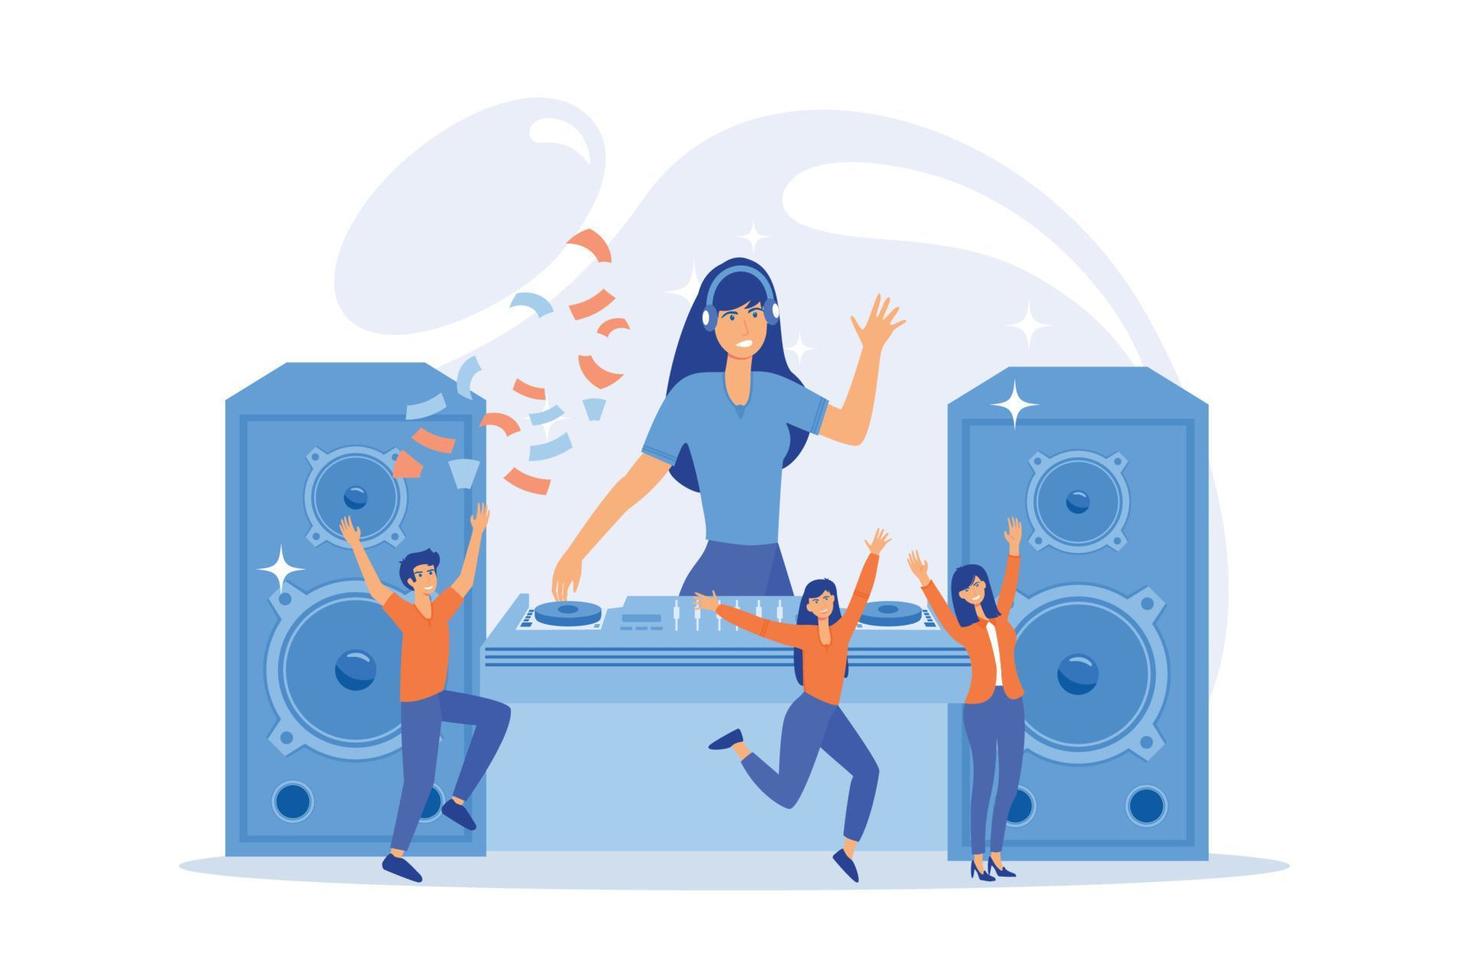 Disco party. People dancing in club and having fun. Nightclub, nightlife, discoteque, clubbing. Female DJ cartoon character. Music concert. vector